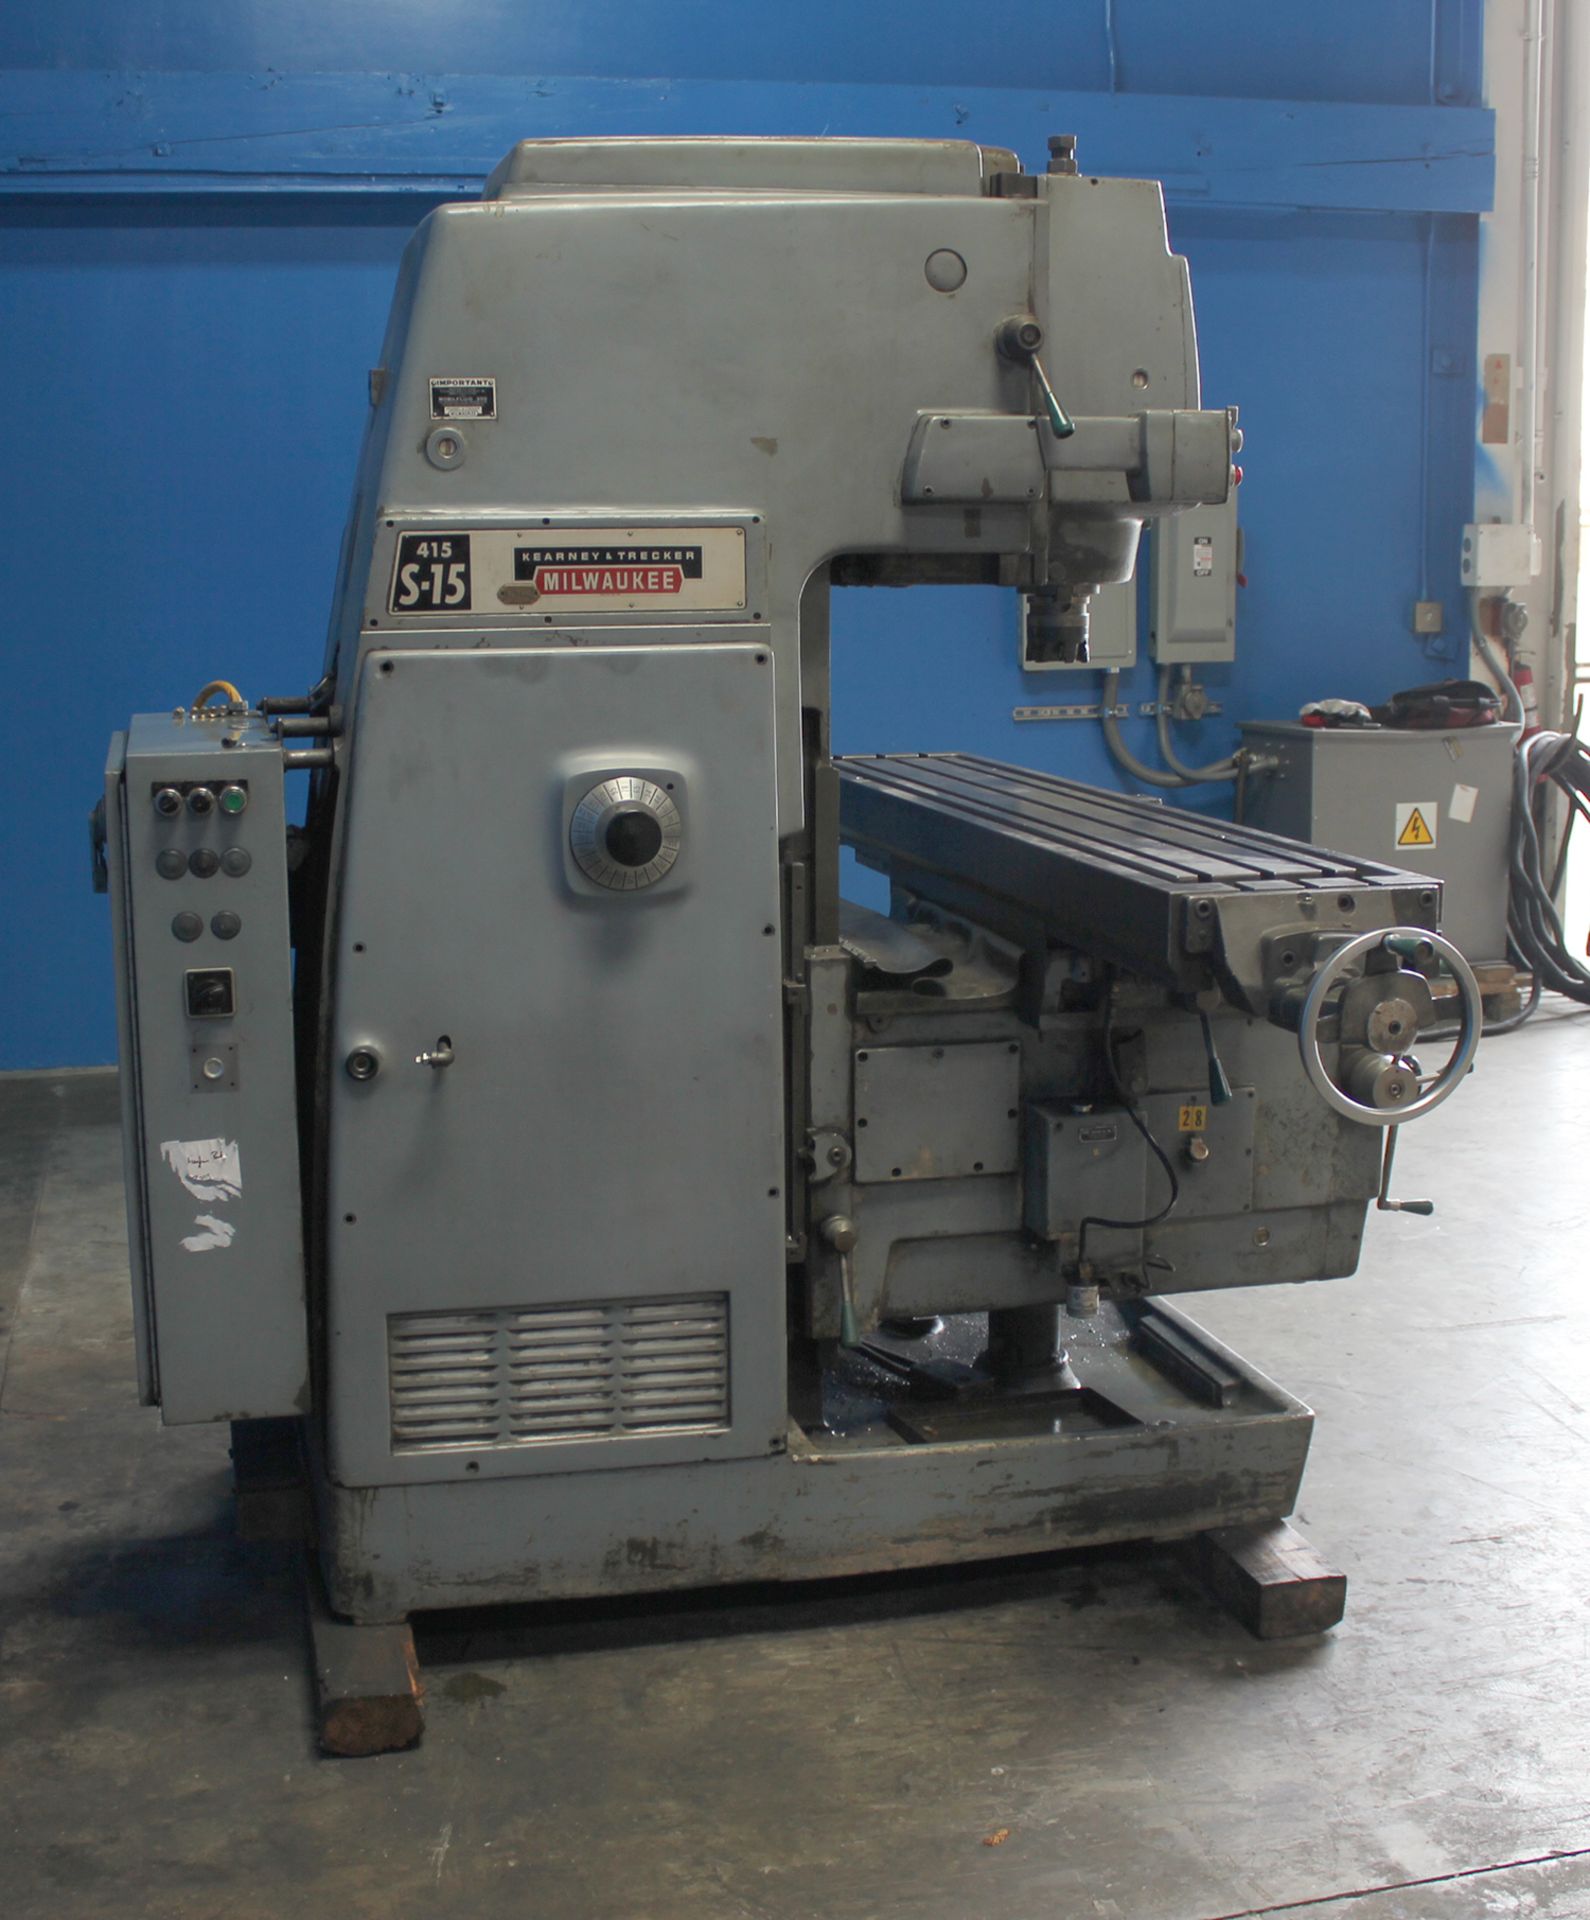 15" x 76" Table Kearney Trecker K&T 415 S-15 Vertical Milling Machine - Located In: Huntington Park, - Image 5 of 8